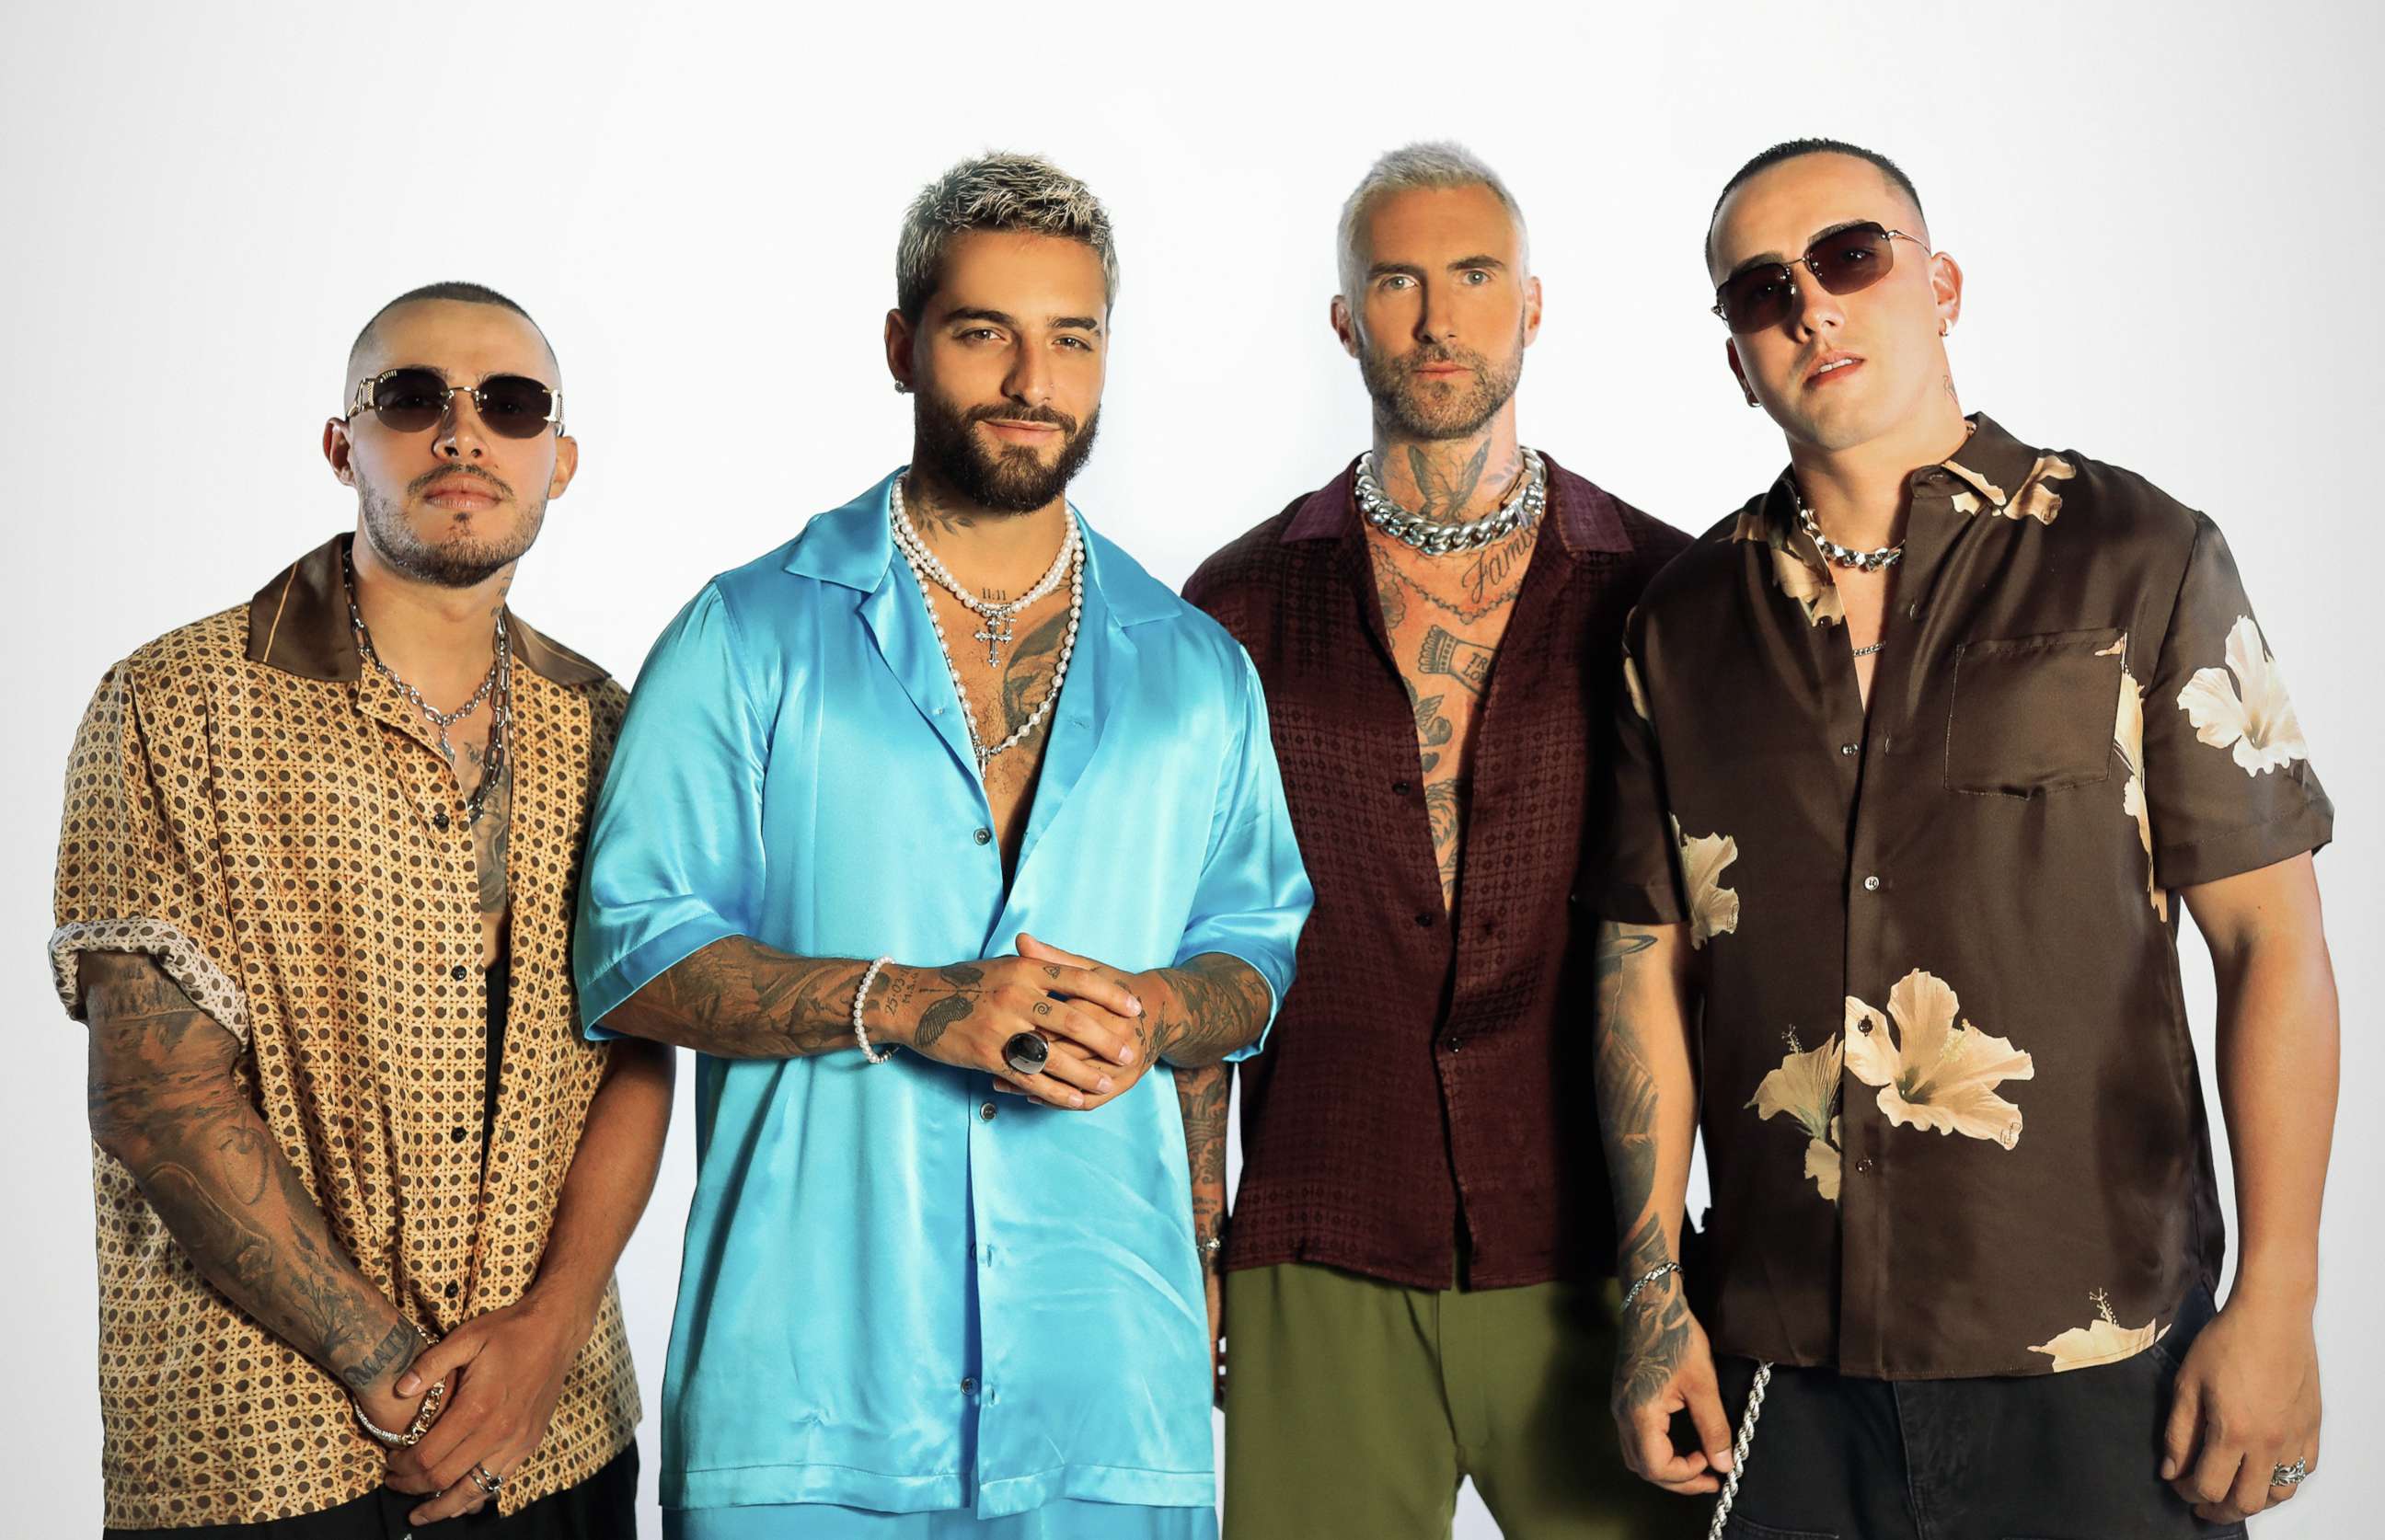 PHOTO: Record producers, The Rudeboyz, pose with singers Adam Levine and Maluma ahead of the release of the single "Ojala."